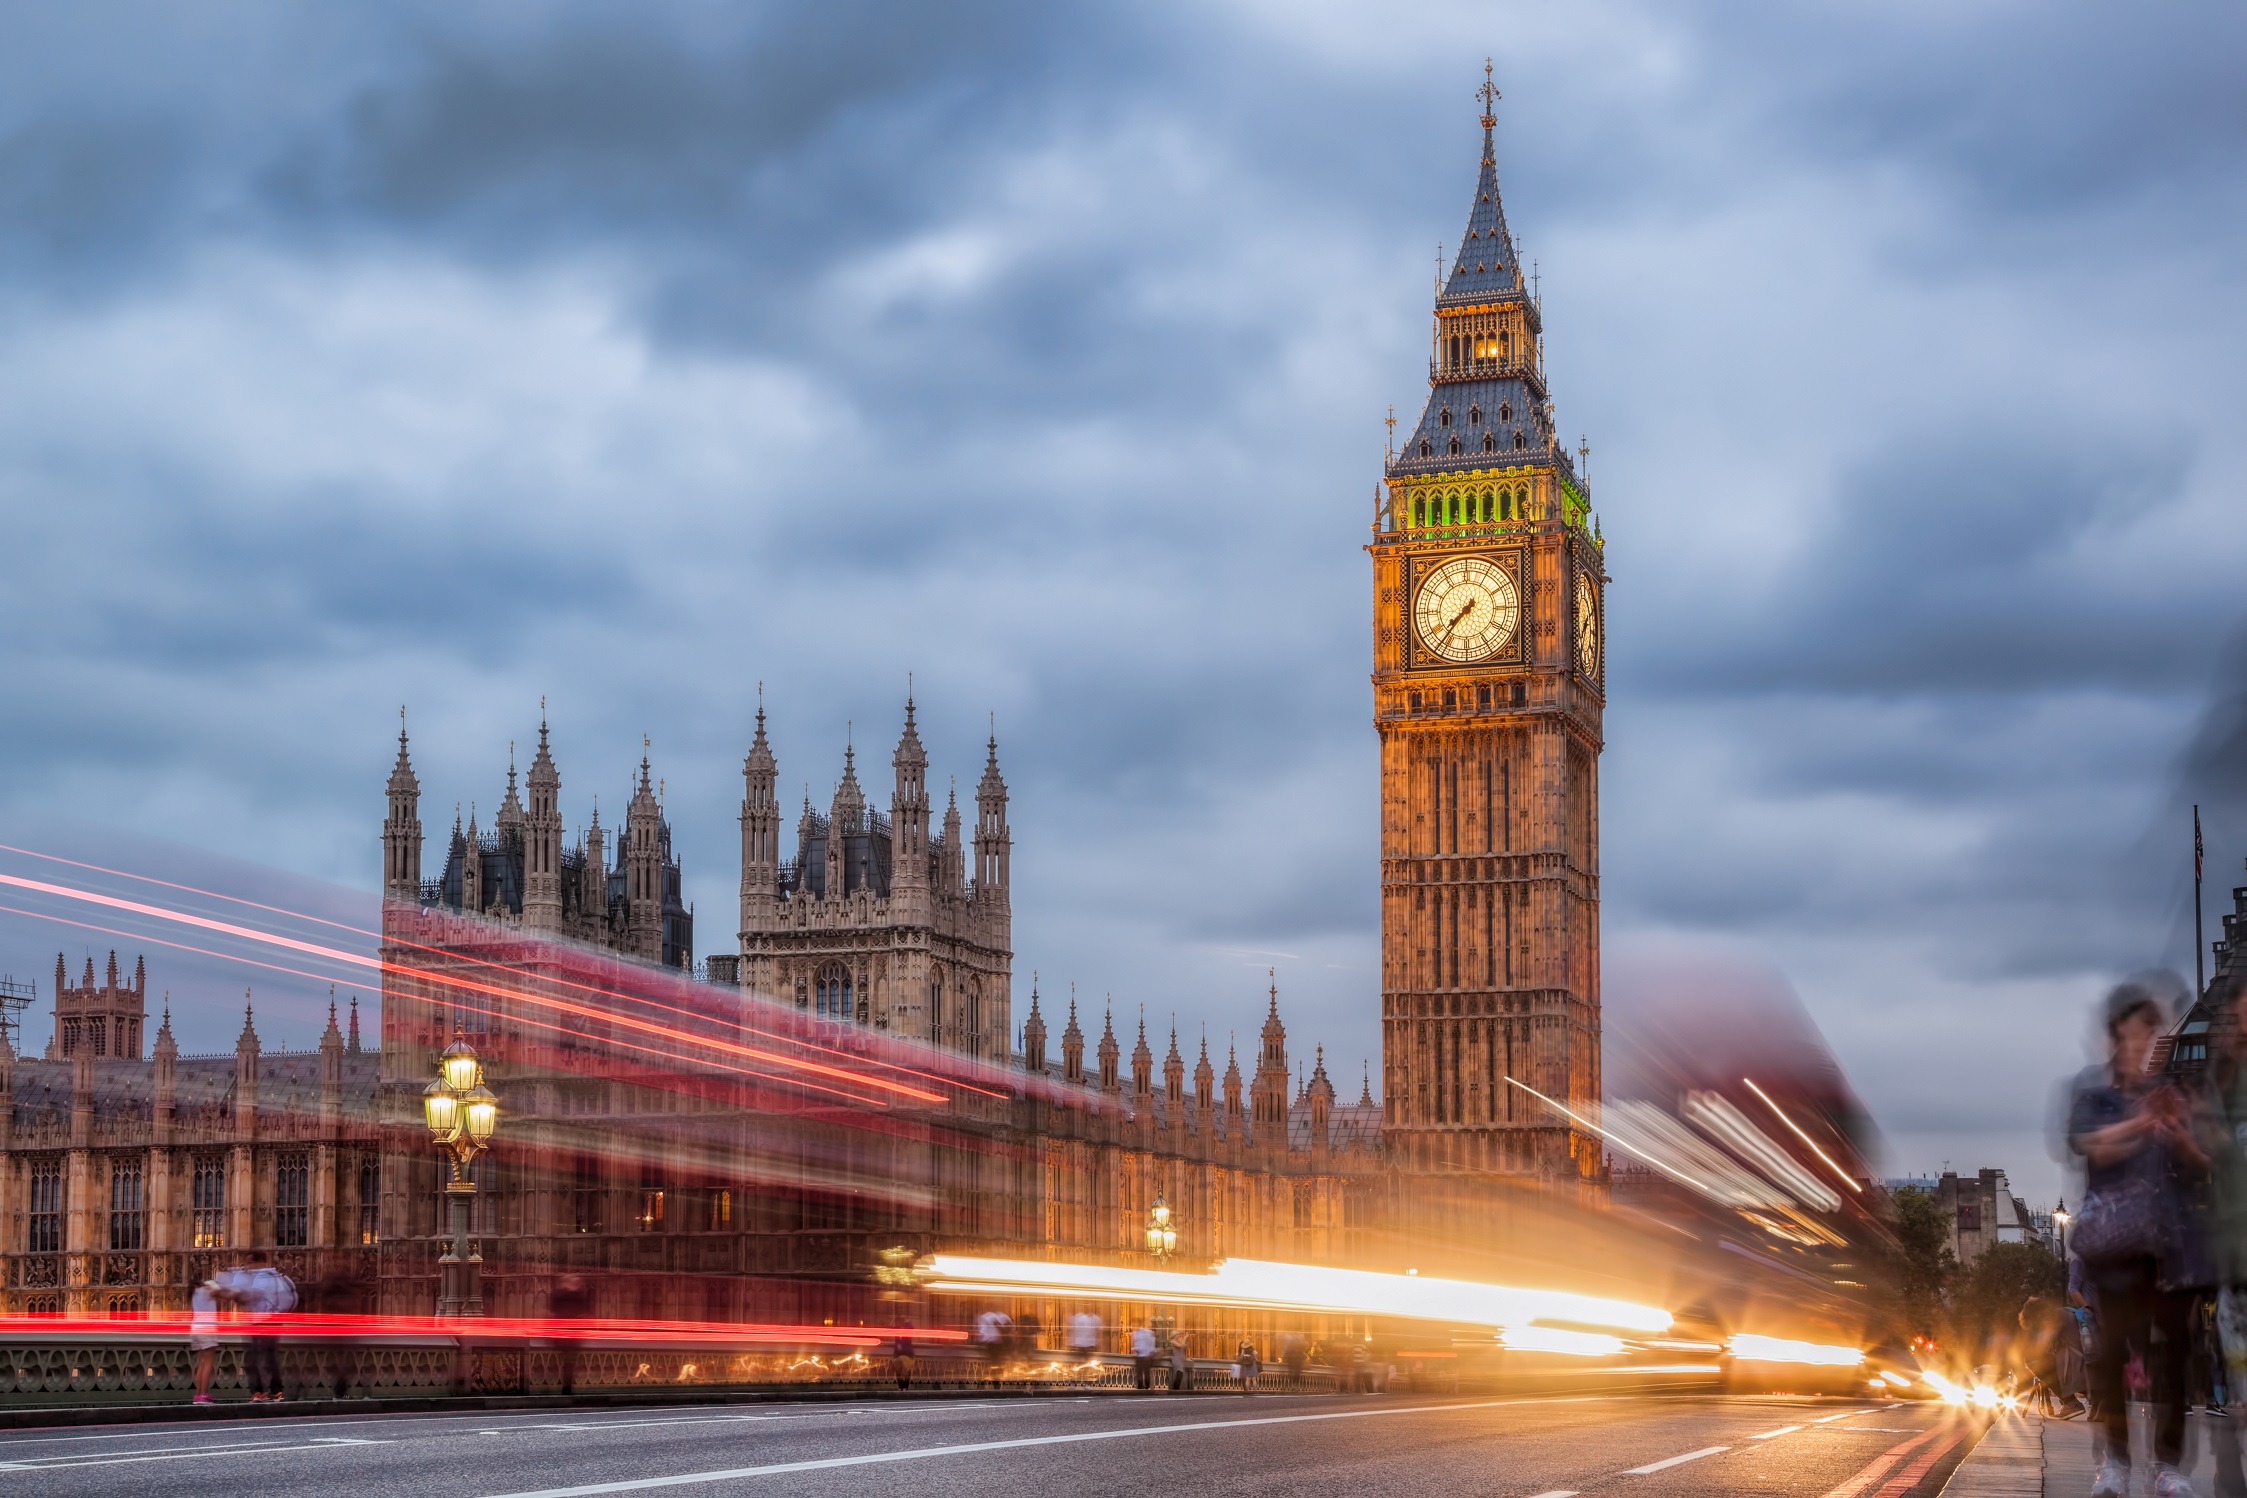 Coach industry makes case in Westminster RHA lobbying event